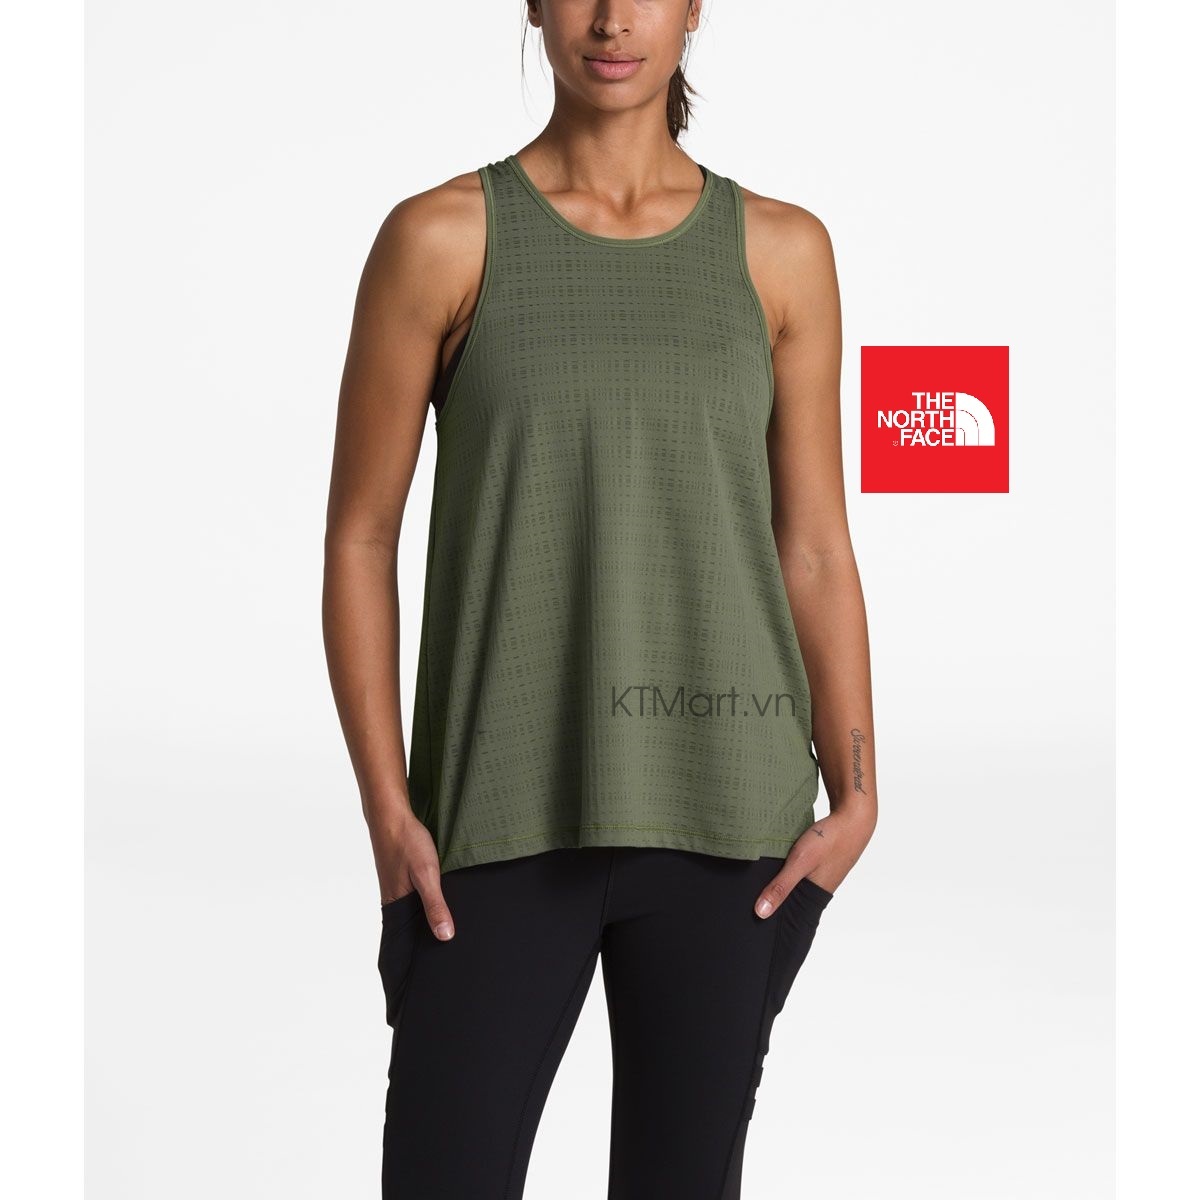 The North Face Womens Dayology Tank NF0A3O2G The North Face size M